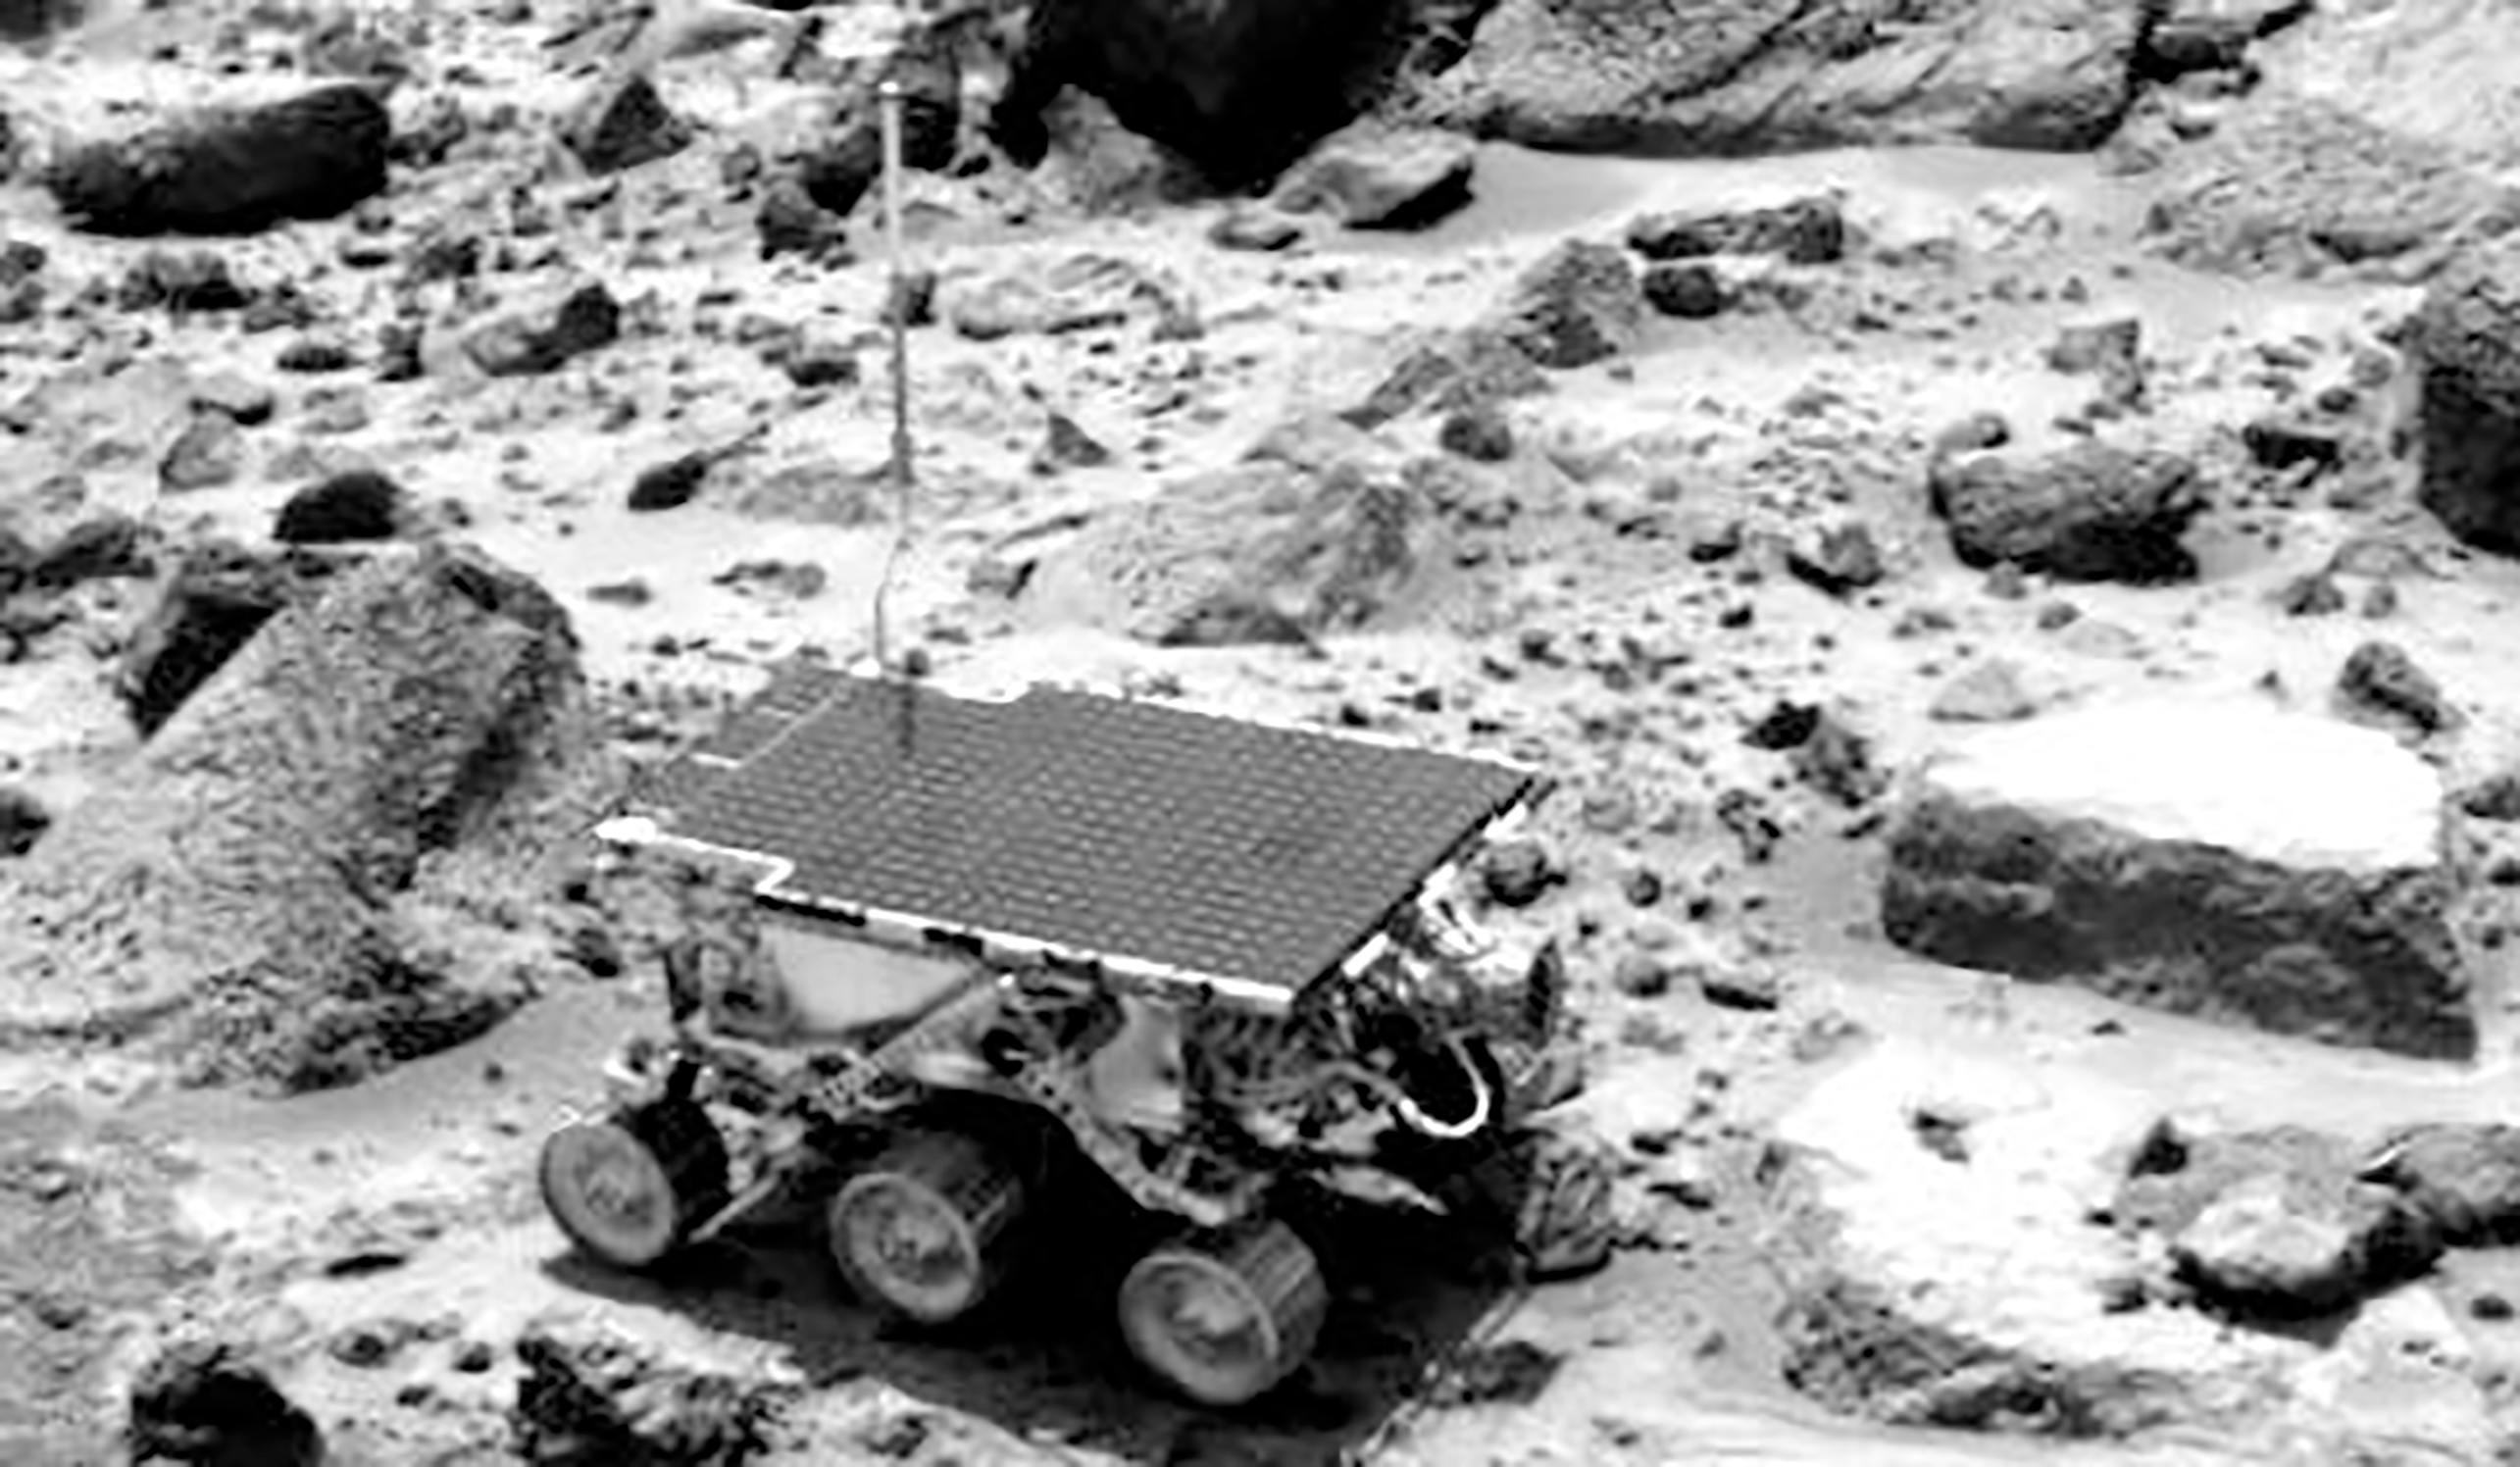 Closeup of the Sojourner Rover on the rocky, dirt ground of Mars. 